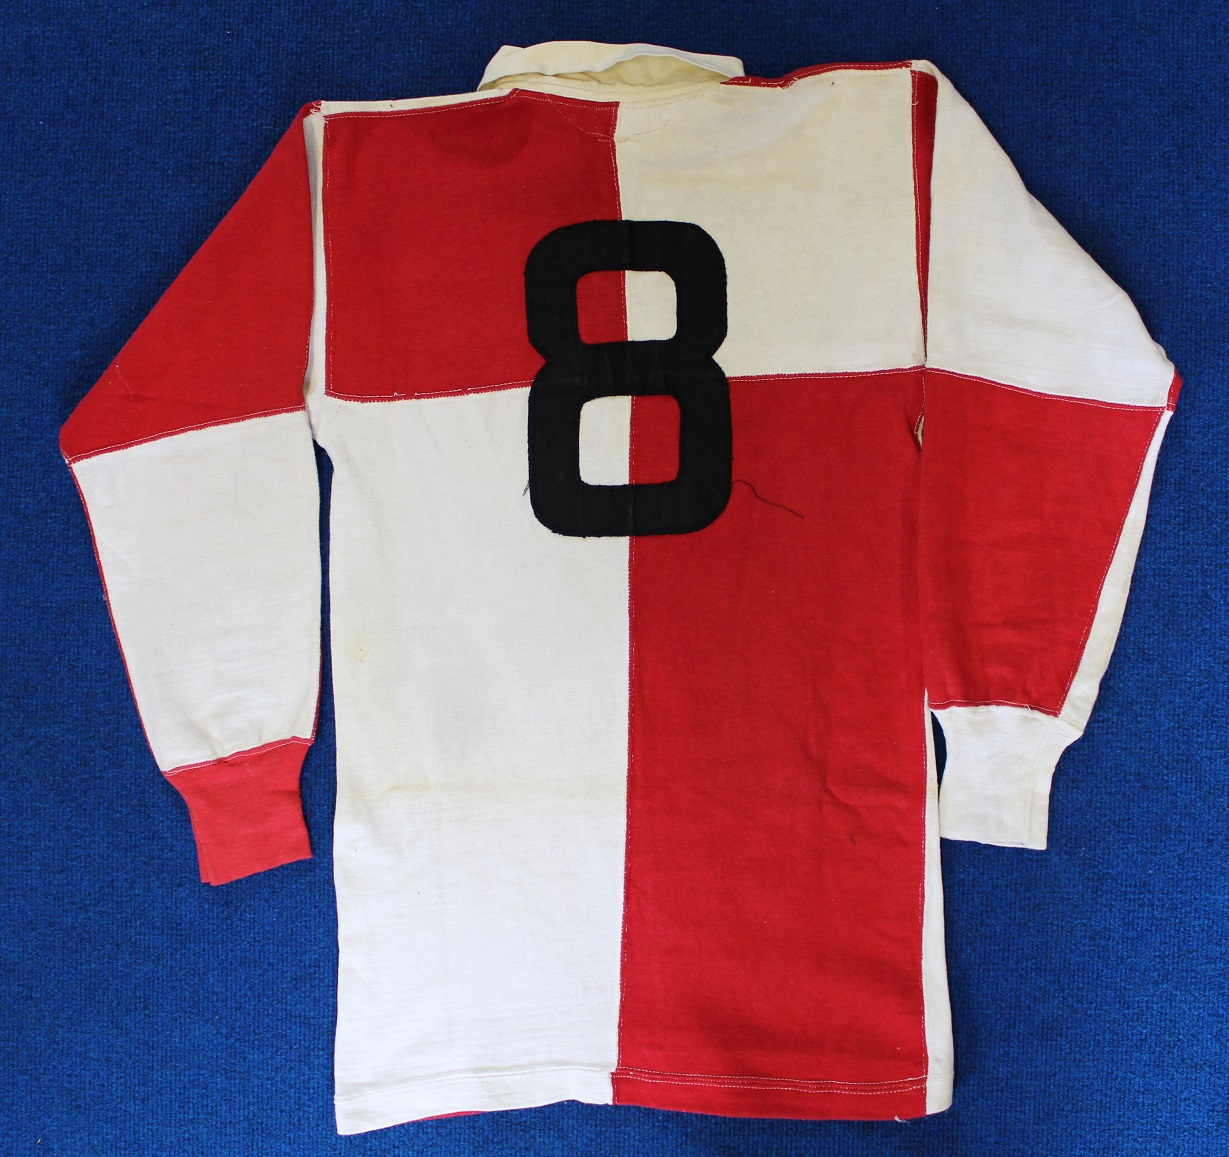 Jersey worn by England-Wales Prop Ray Prosser